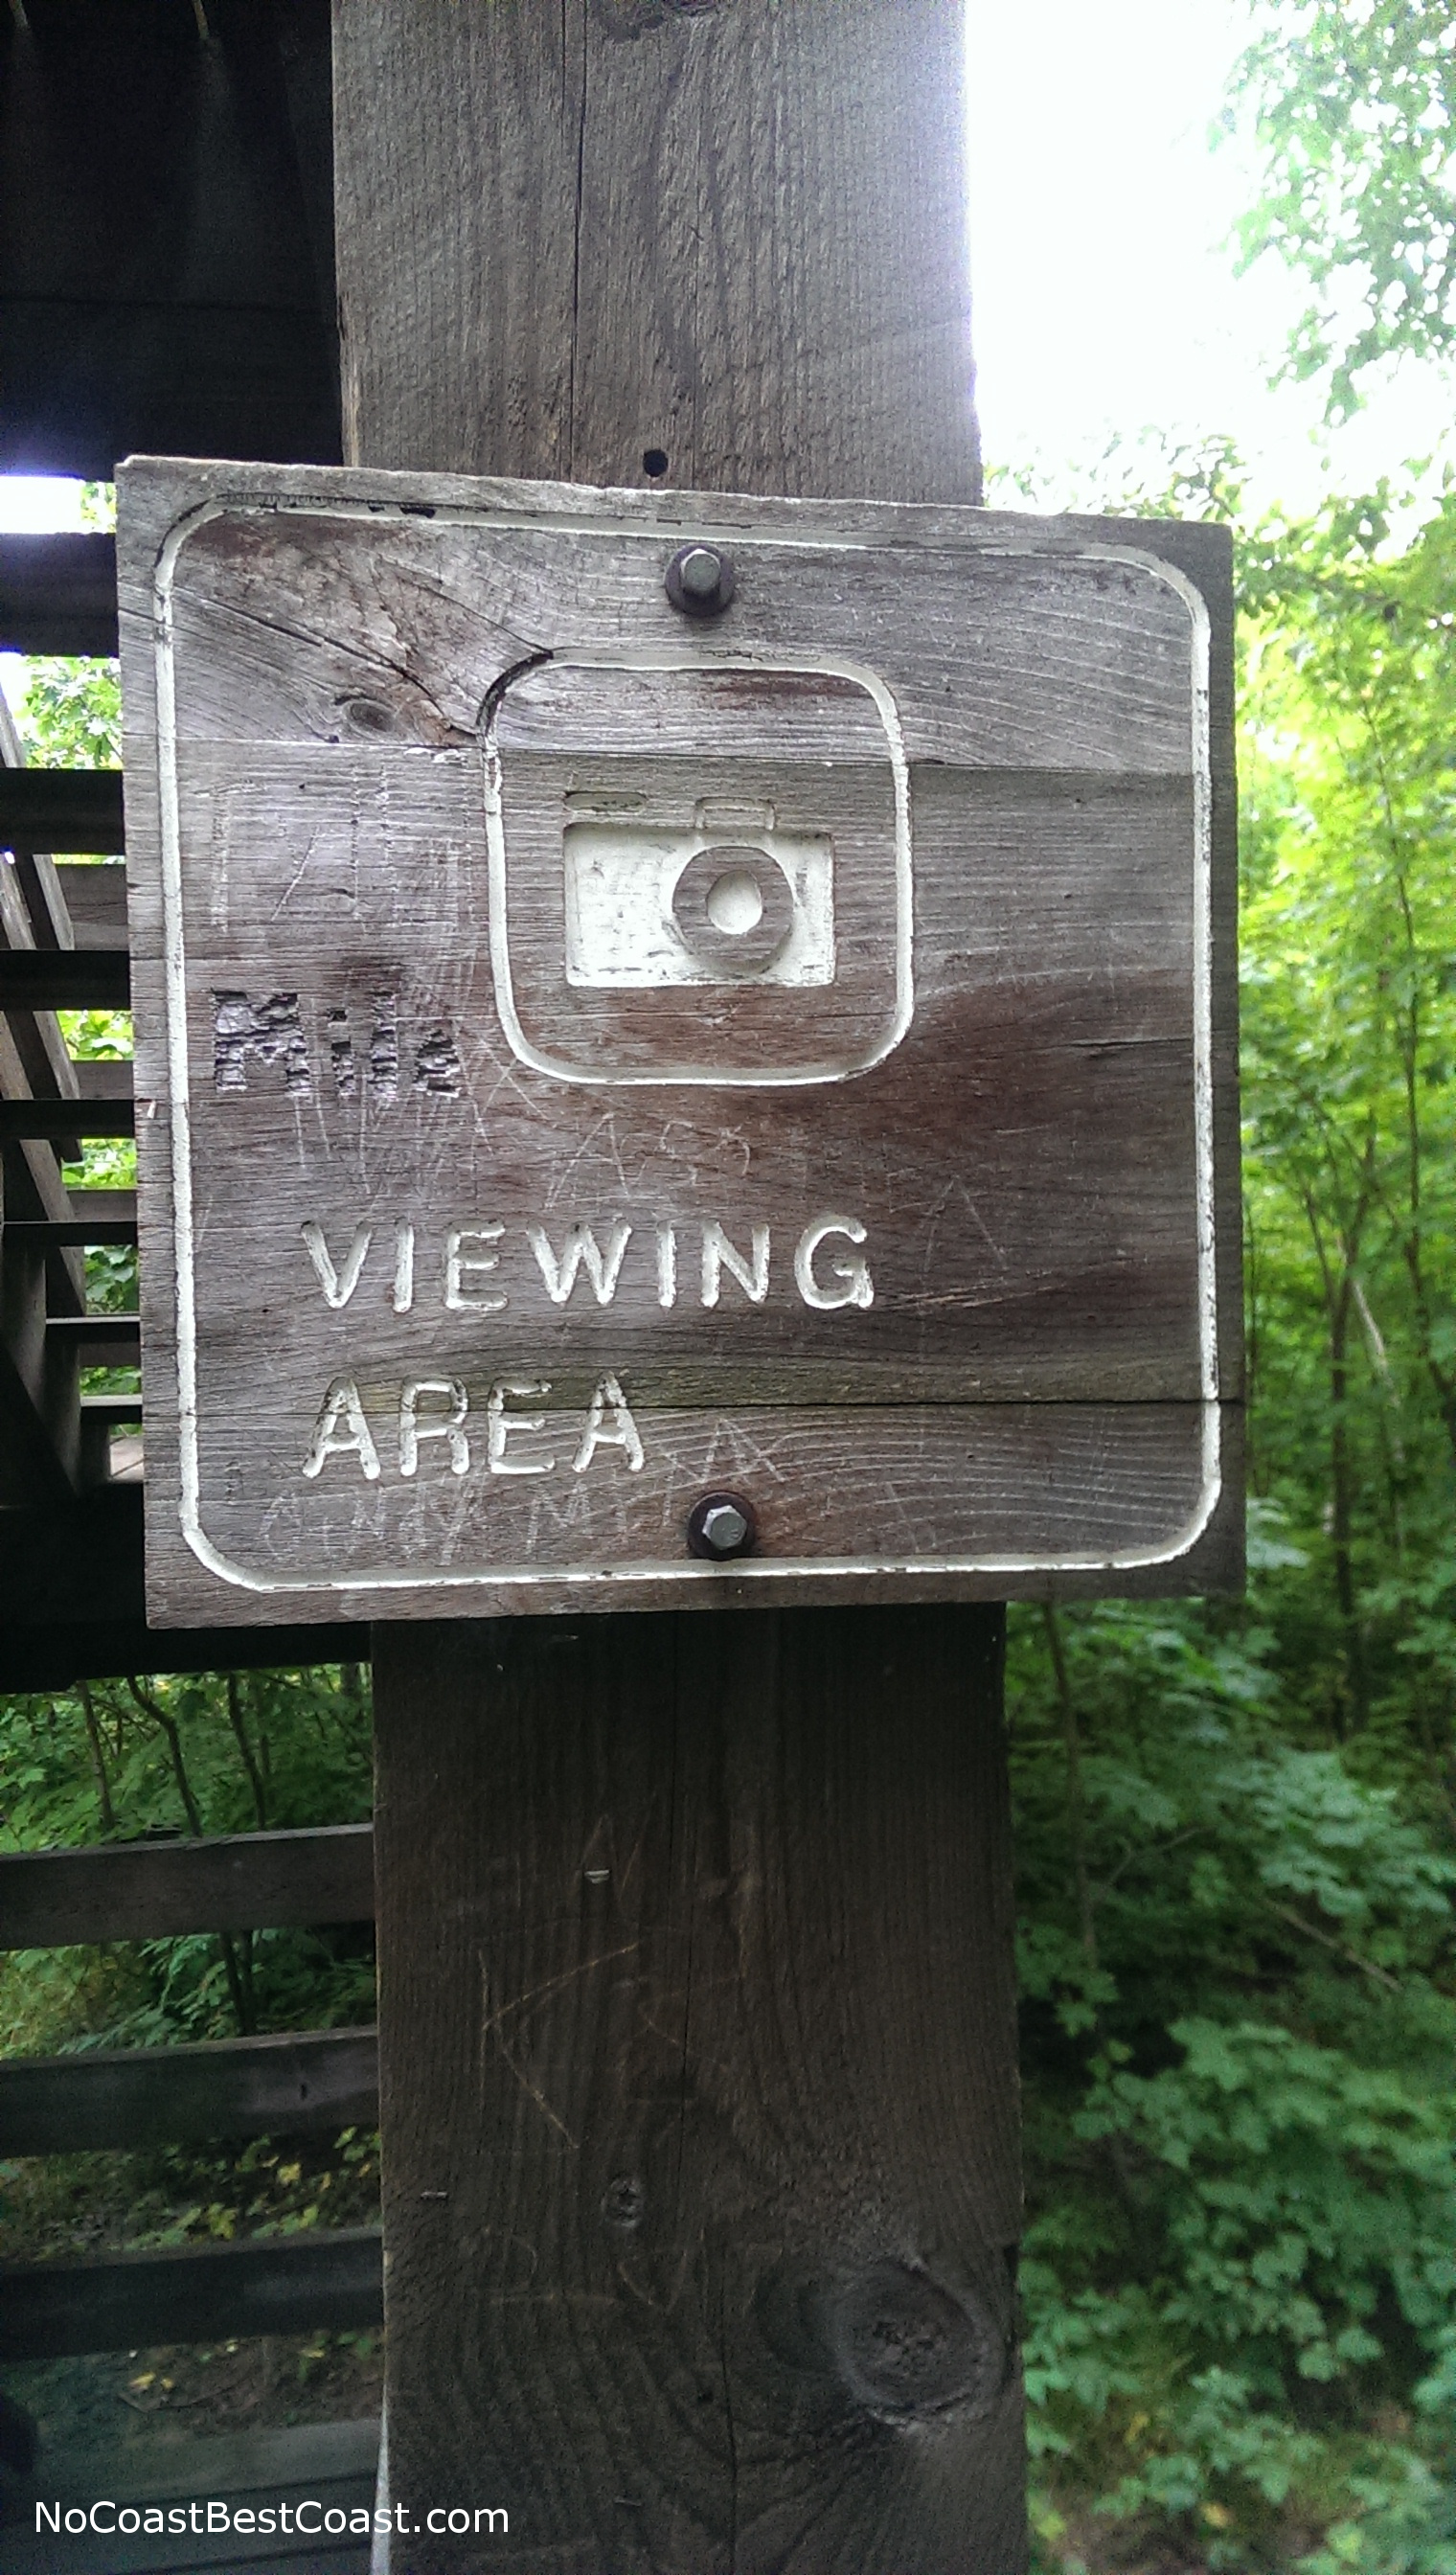 The inspiration for the Instagram logo probably originated from this sign at the base of the observation tower